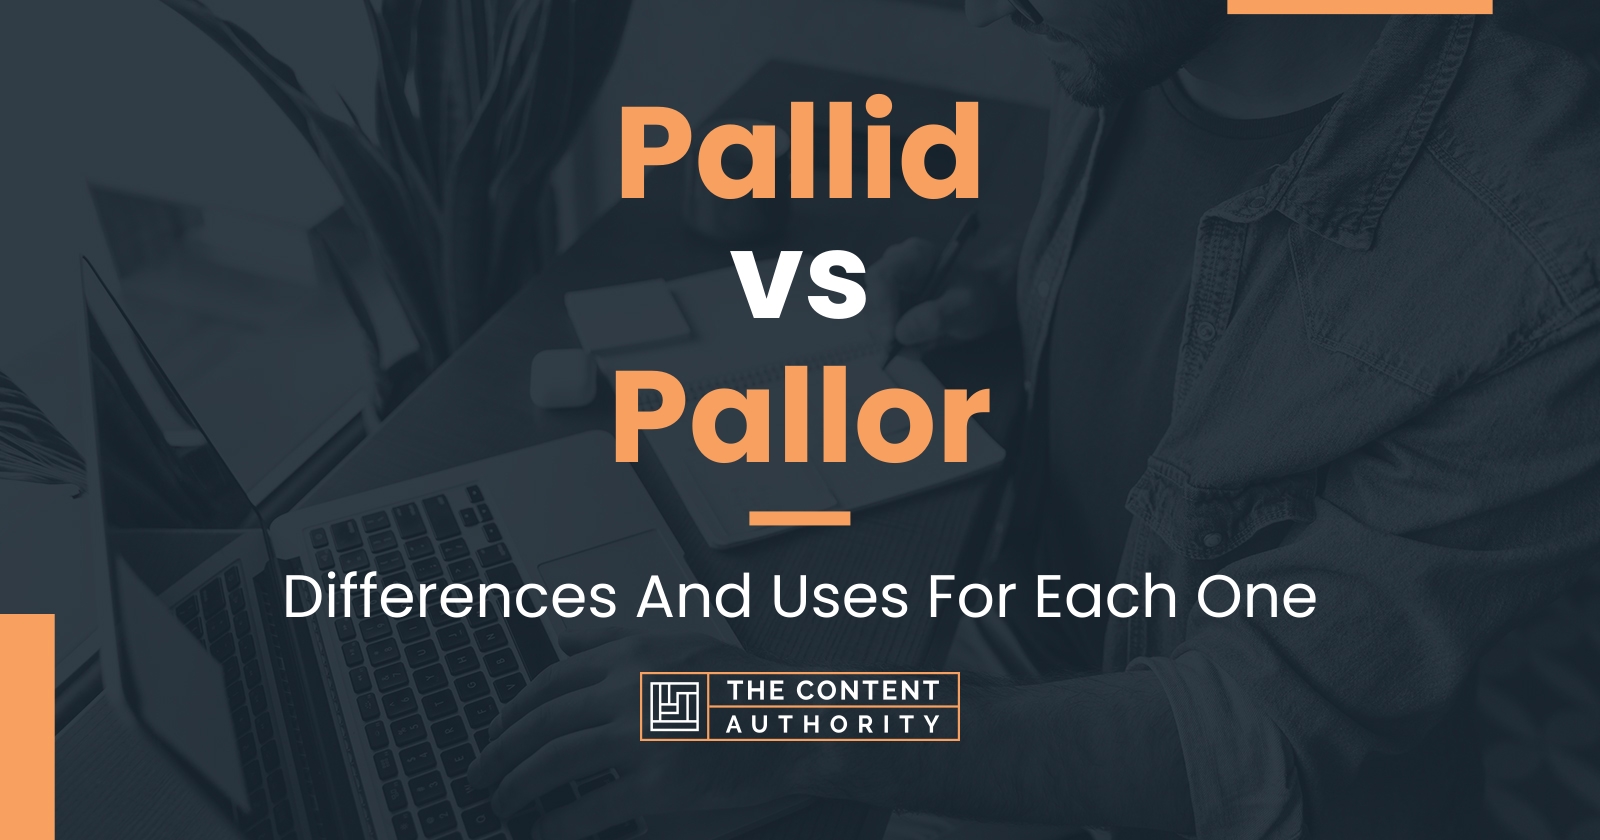 Pallid vs Pallor: Differences And Uses For Each One